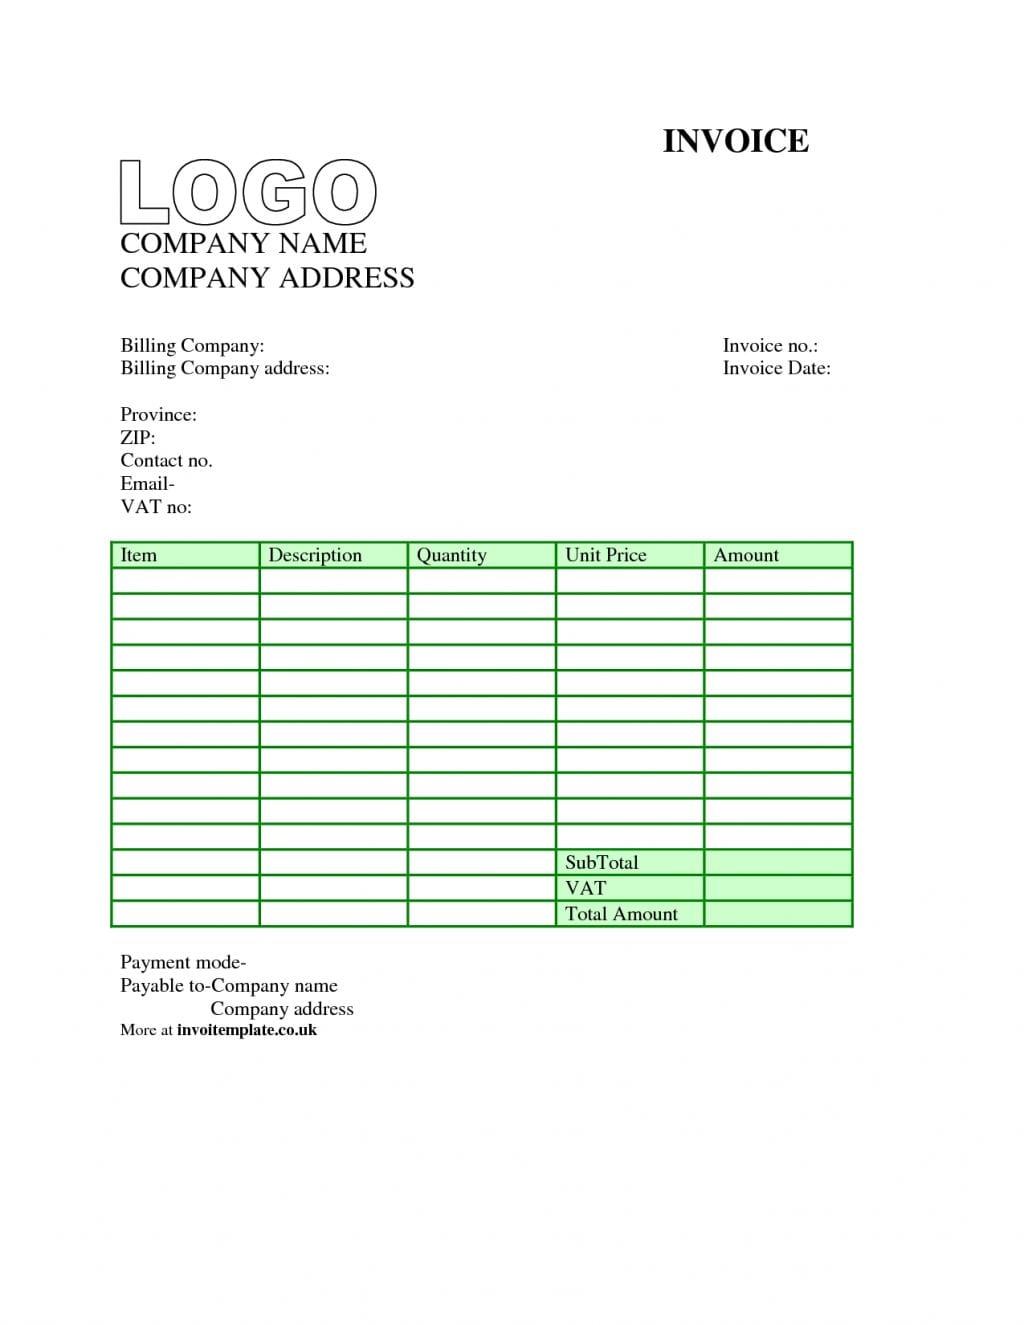 an invoice template for openoffice